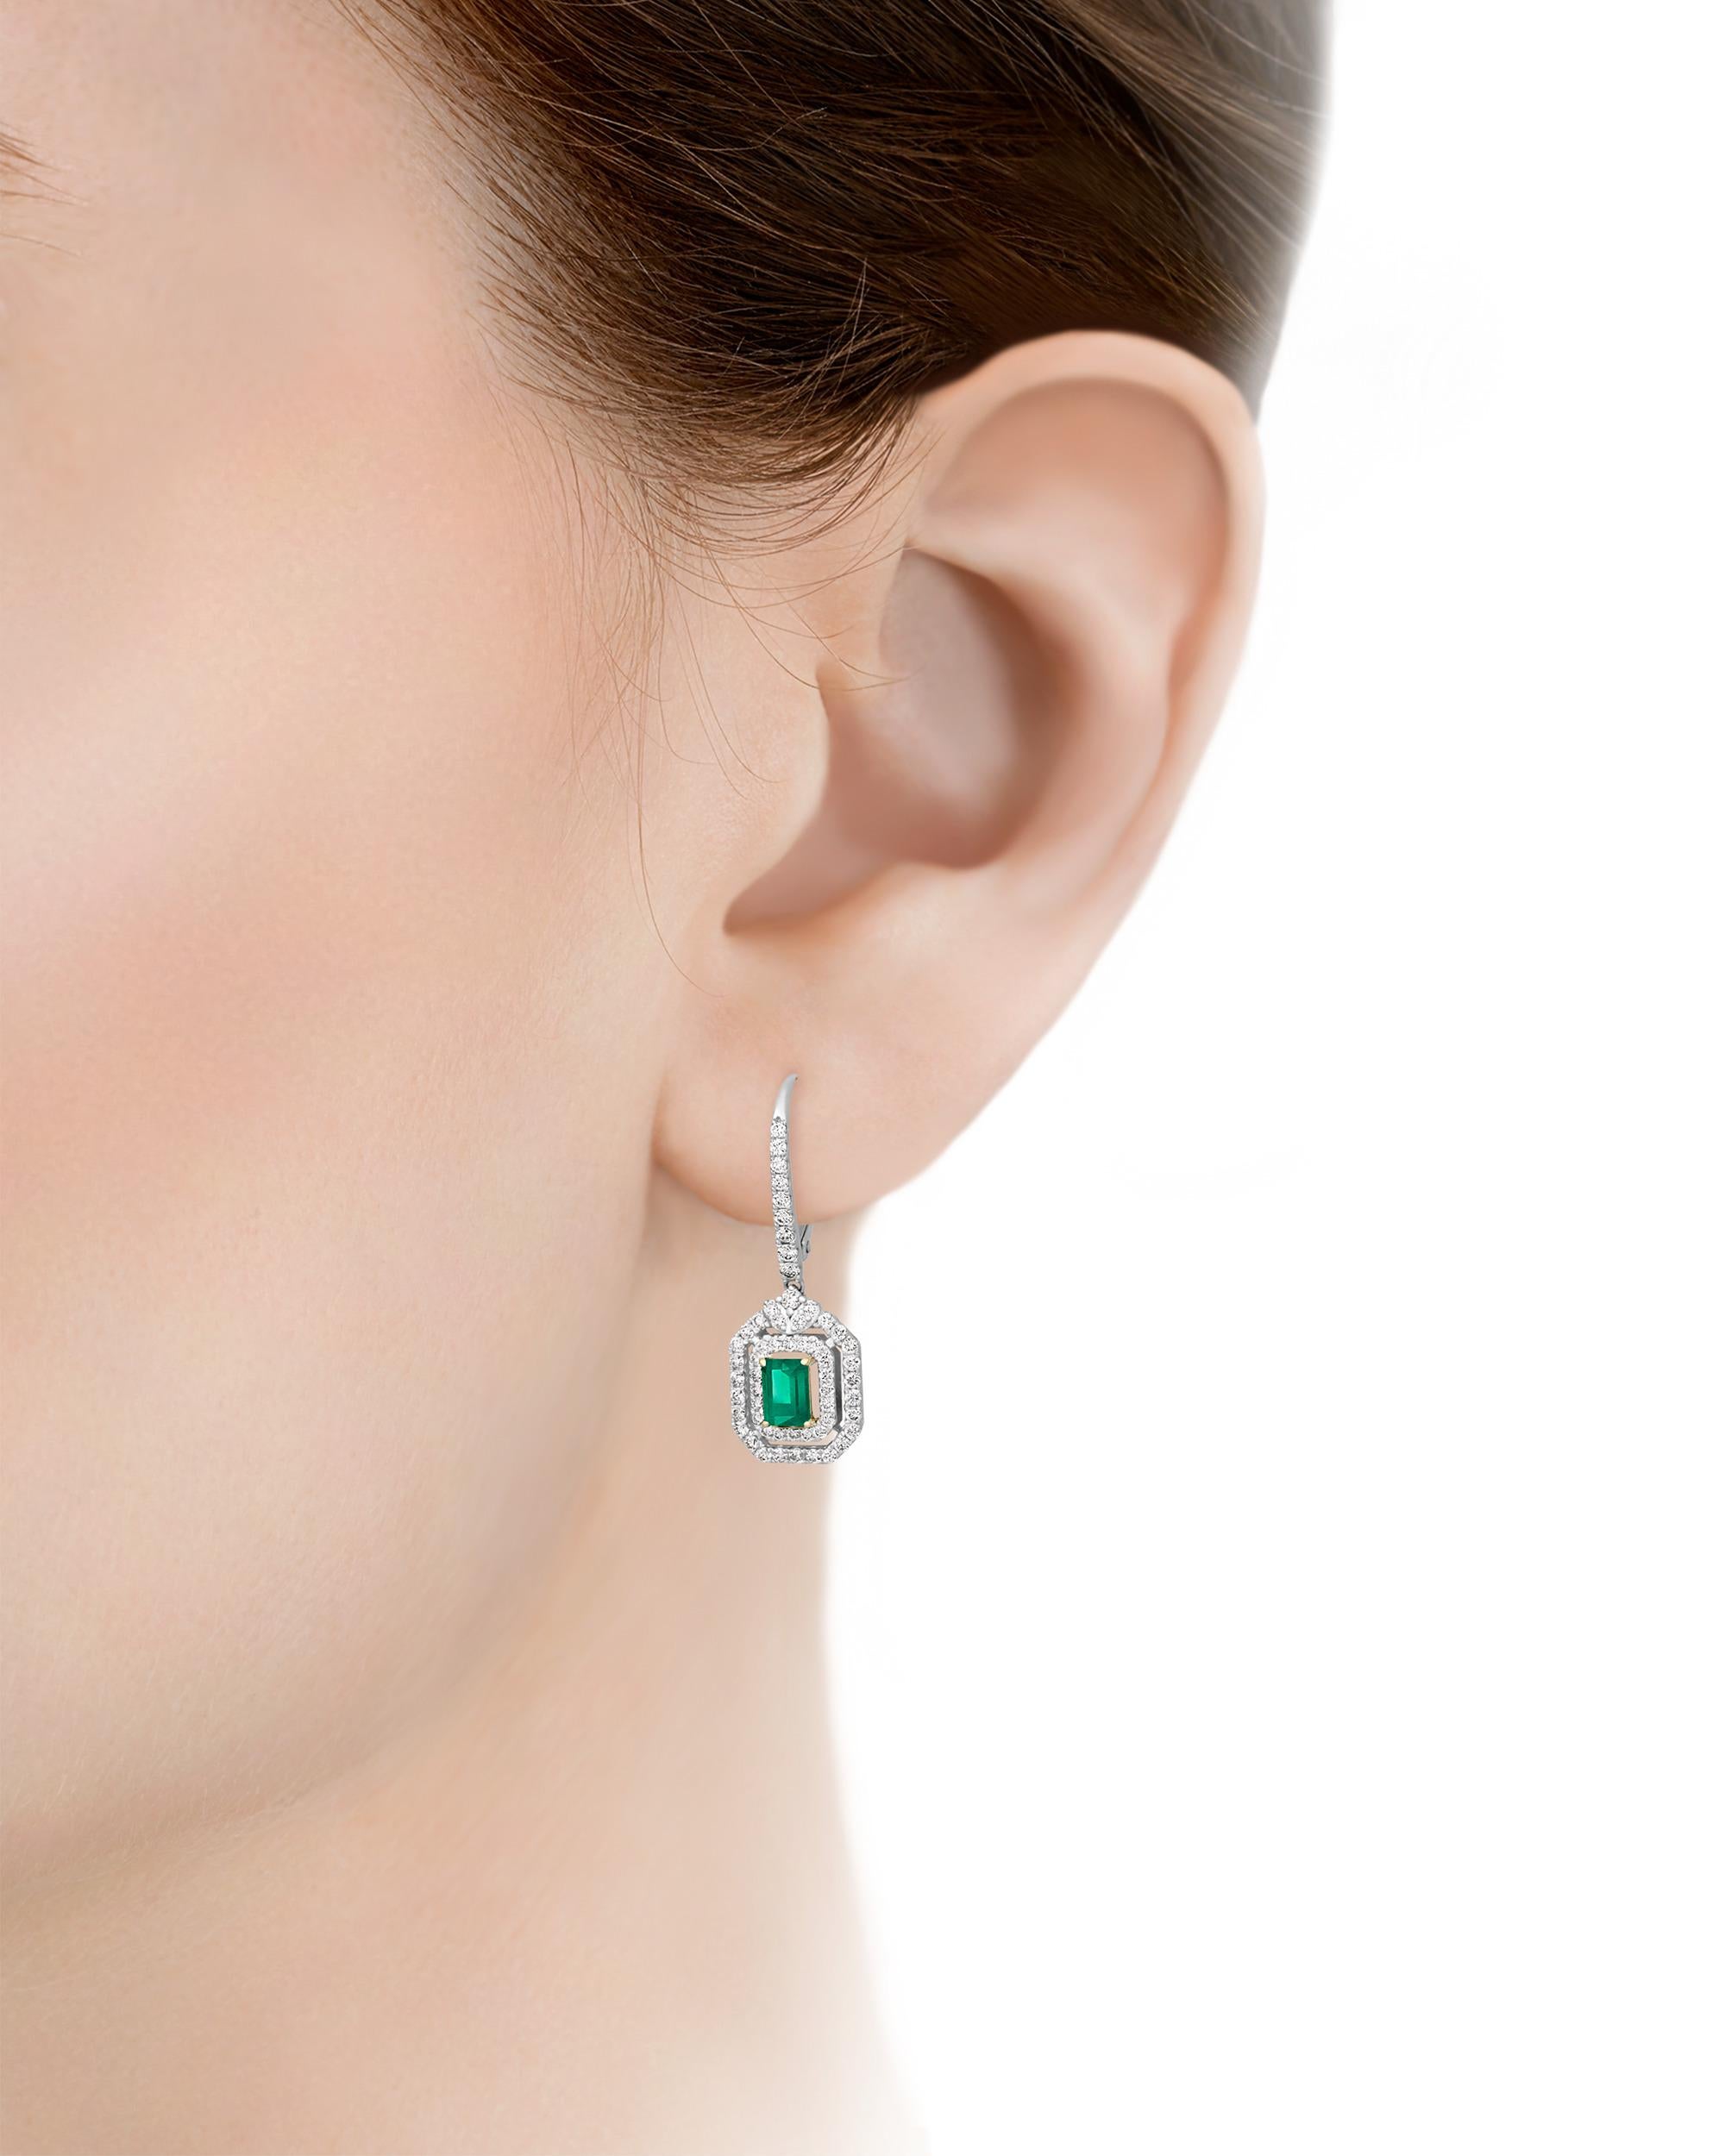 Two emerald-cut Colombian emeralds totaling 0.74 carats display the lush green hue for which stones from that region are so prized in these exceptional dangle earrings. Surrounding these jewels are shimmering white diamonds in a timeless geometric